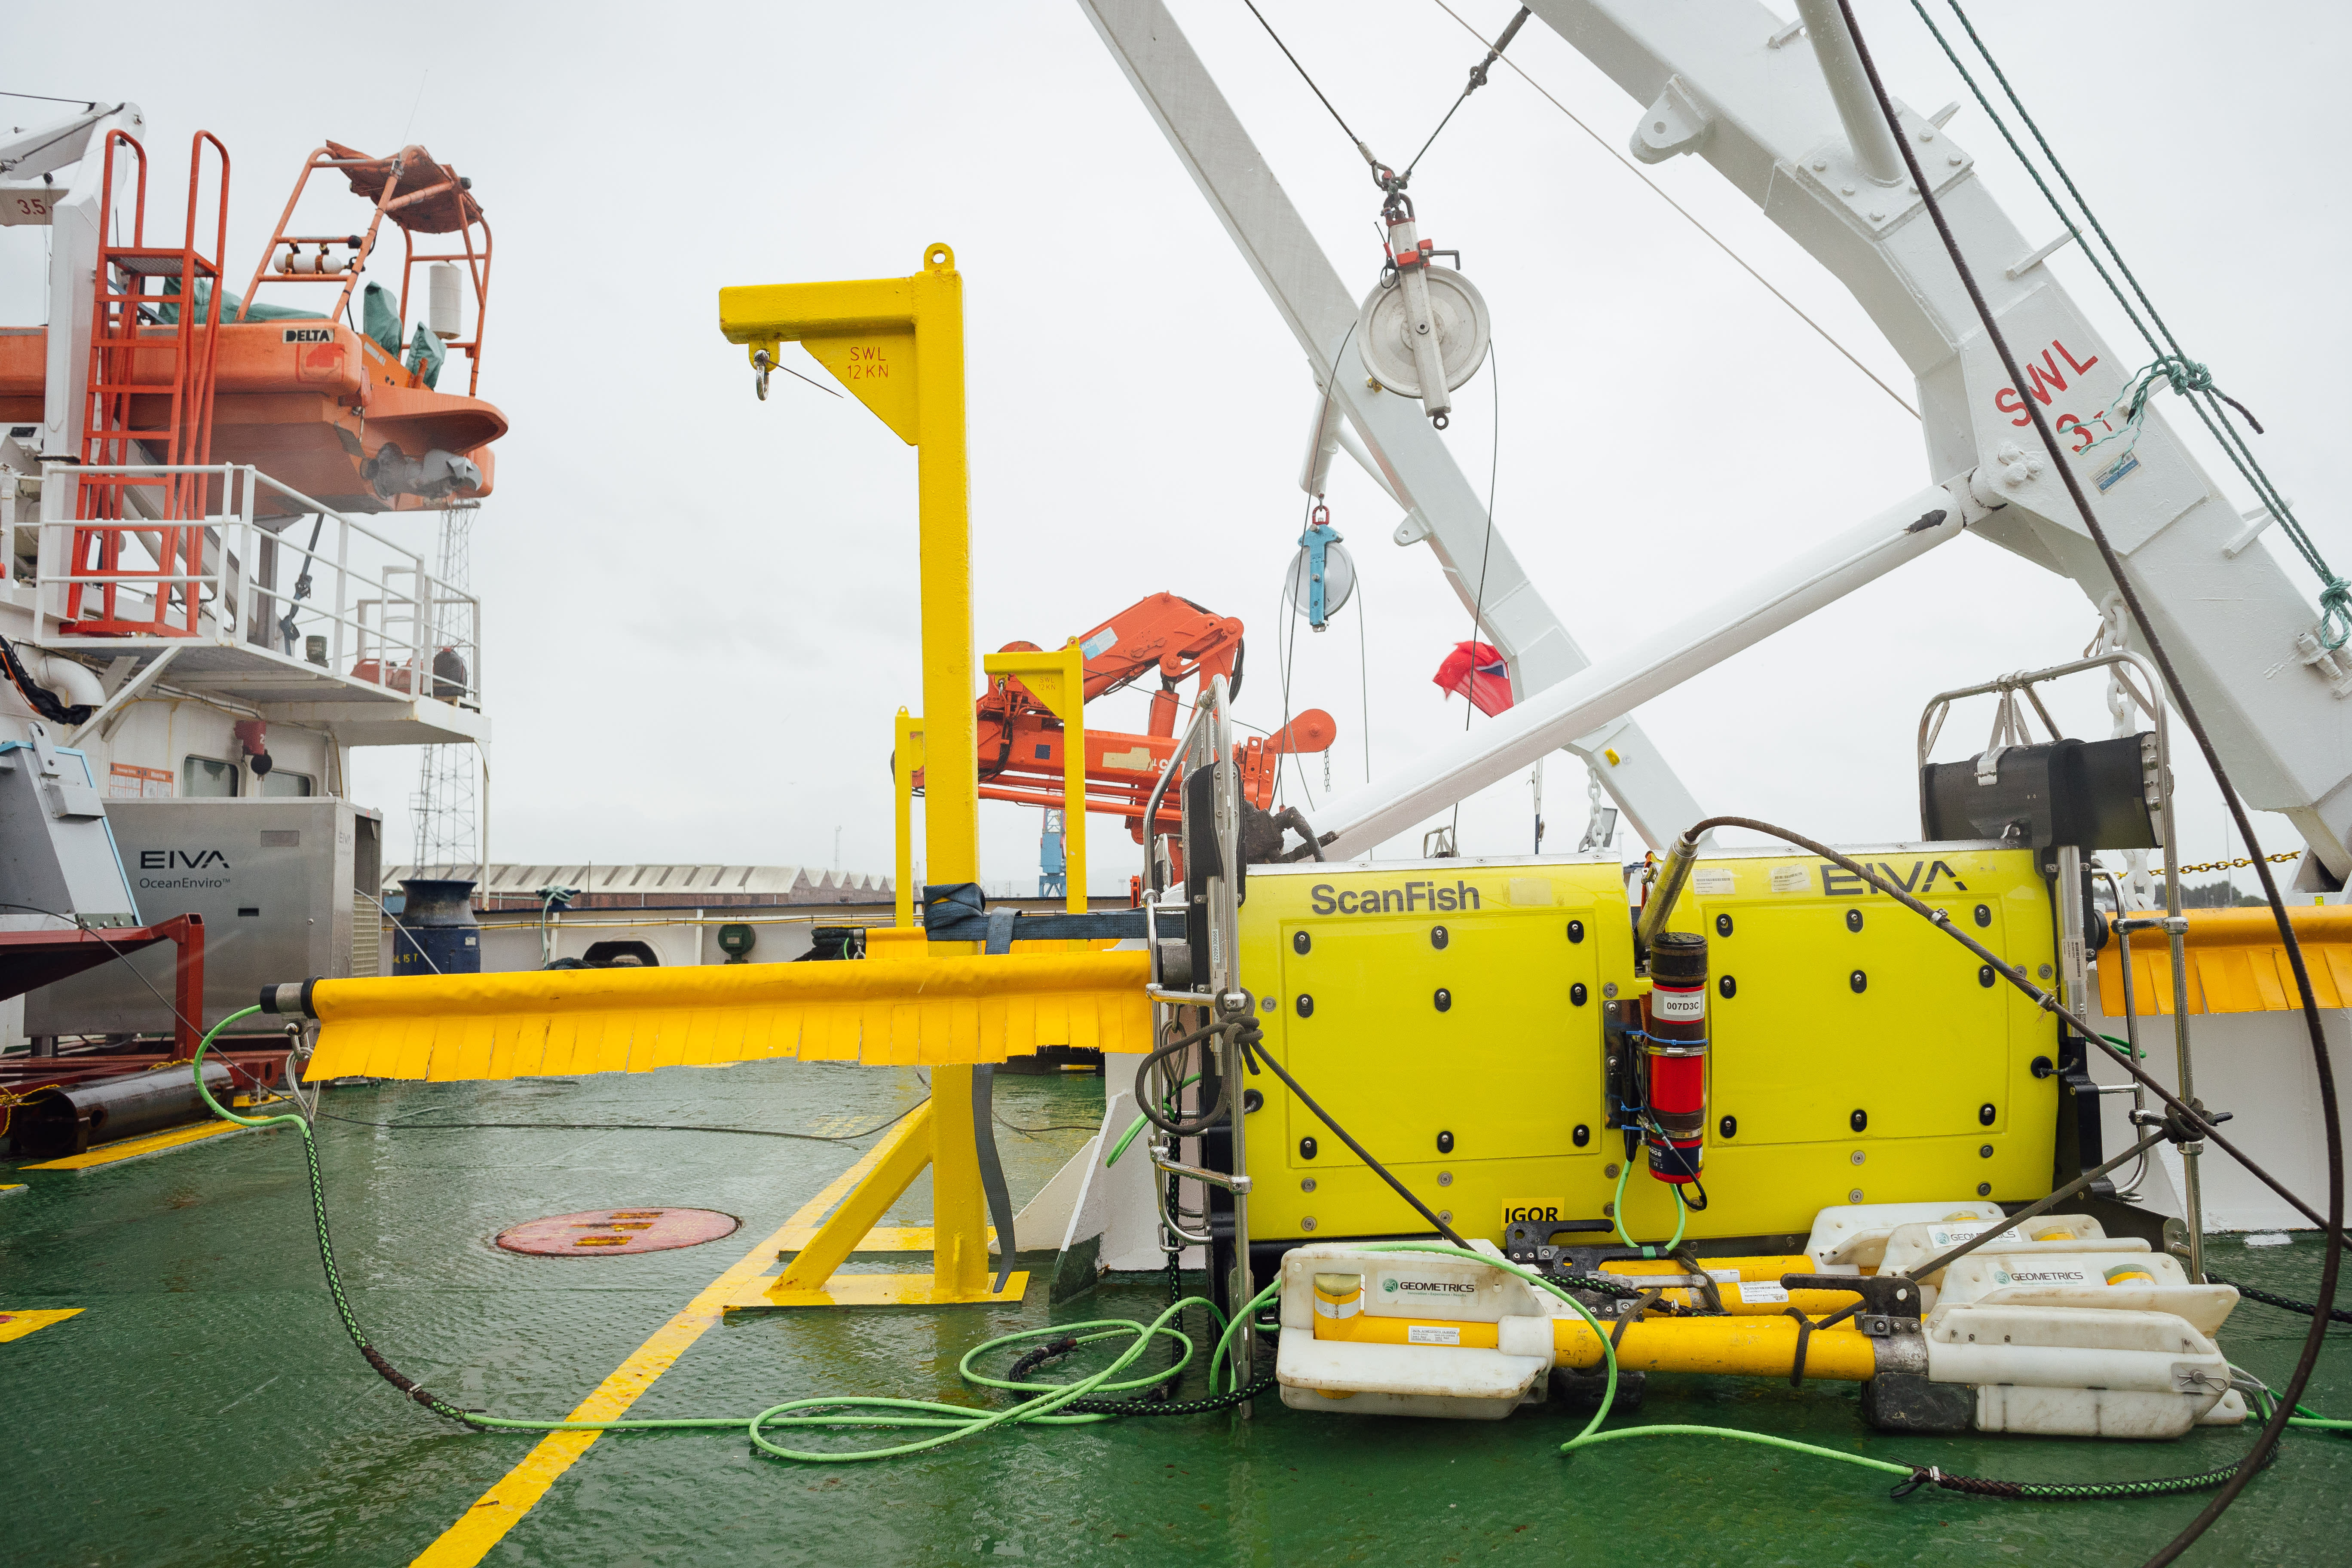 Machinery used to survey the Celtic Sea